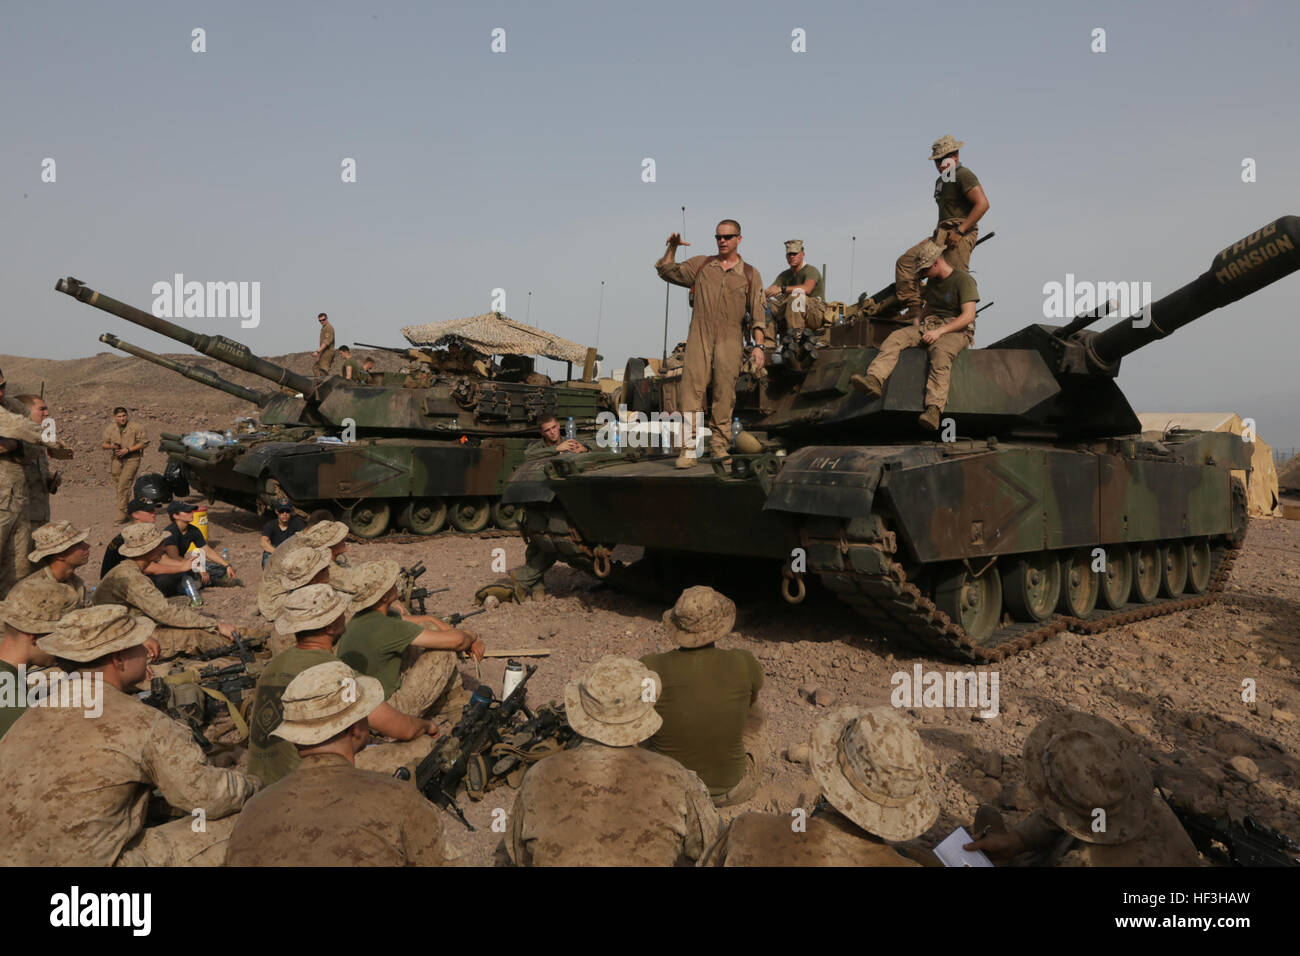 ARTA BEACH, Djibouti (July 24, 2015) U.S. Marine 1st Lt. Stephen Stone, center, teaches the Marines of Battalion Landing Team 3rd Battalion, 1st Marine Regiment, 15th Marine Expeditionary Unit, about the functions of an M1A1 Abrams tank.  Stone is a tank platoon commander with BLT 3/1, 15th MEU.  Elements of the 15th Marine Expeditionary Unit are ashore in Djibouti for sustainment training to maintain and enhance the skills they developed during their pre-deployment training period.  The 15th MEU is currently deployed in support of maritime security operations and theater security cooperation  Stock Photo